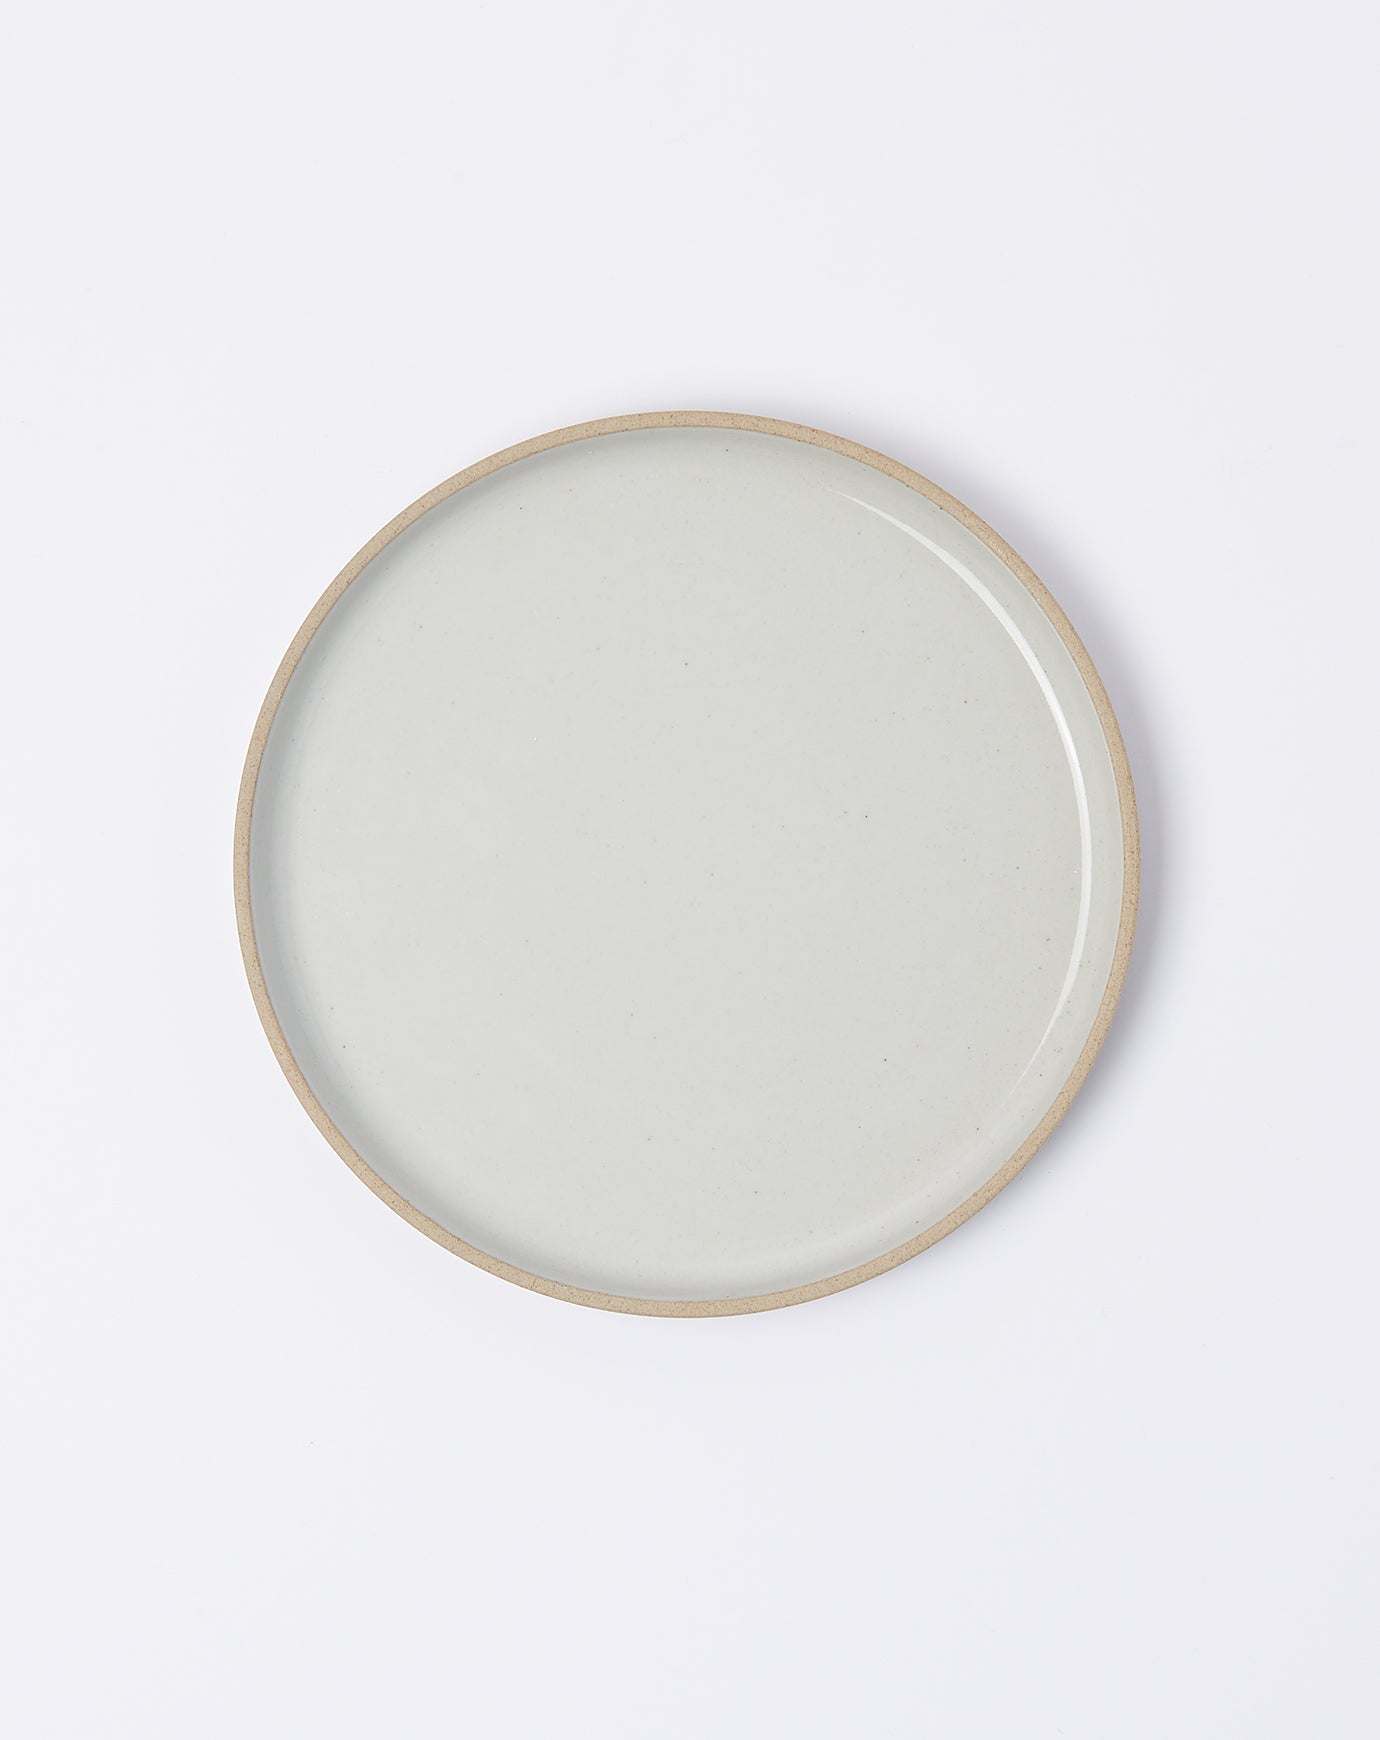 Hasami Porcelain Plate in Gloss Grey